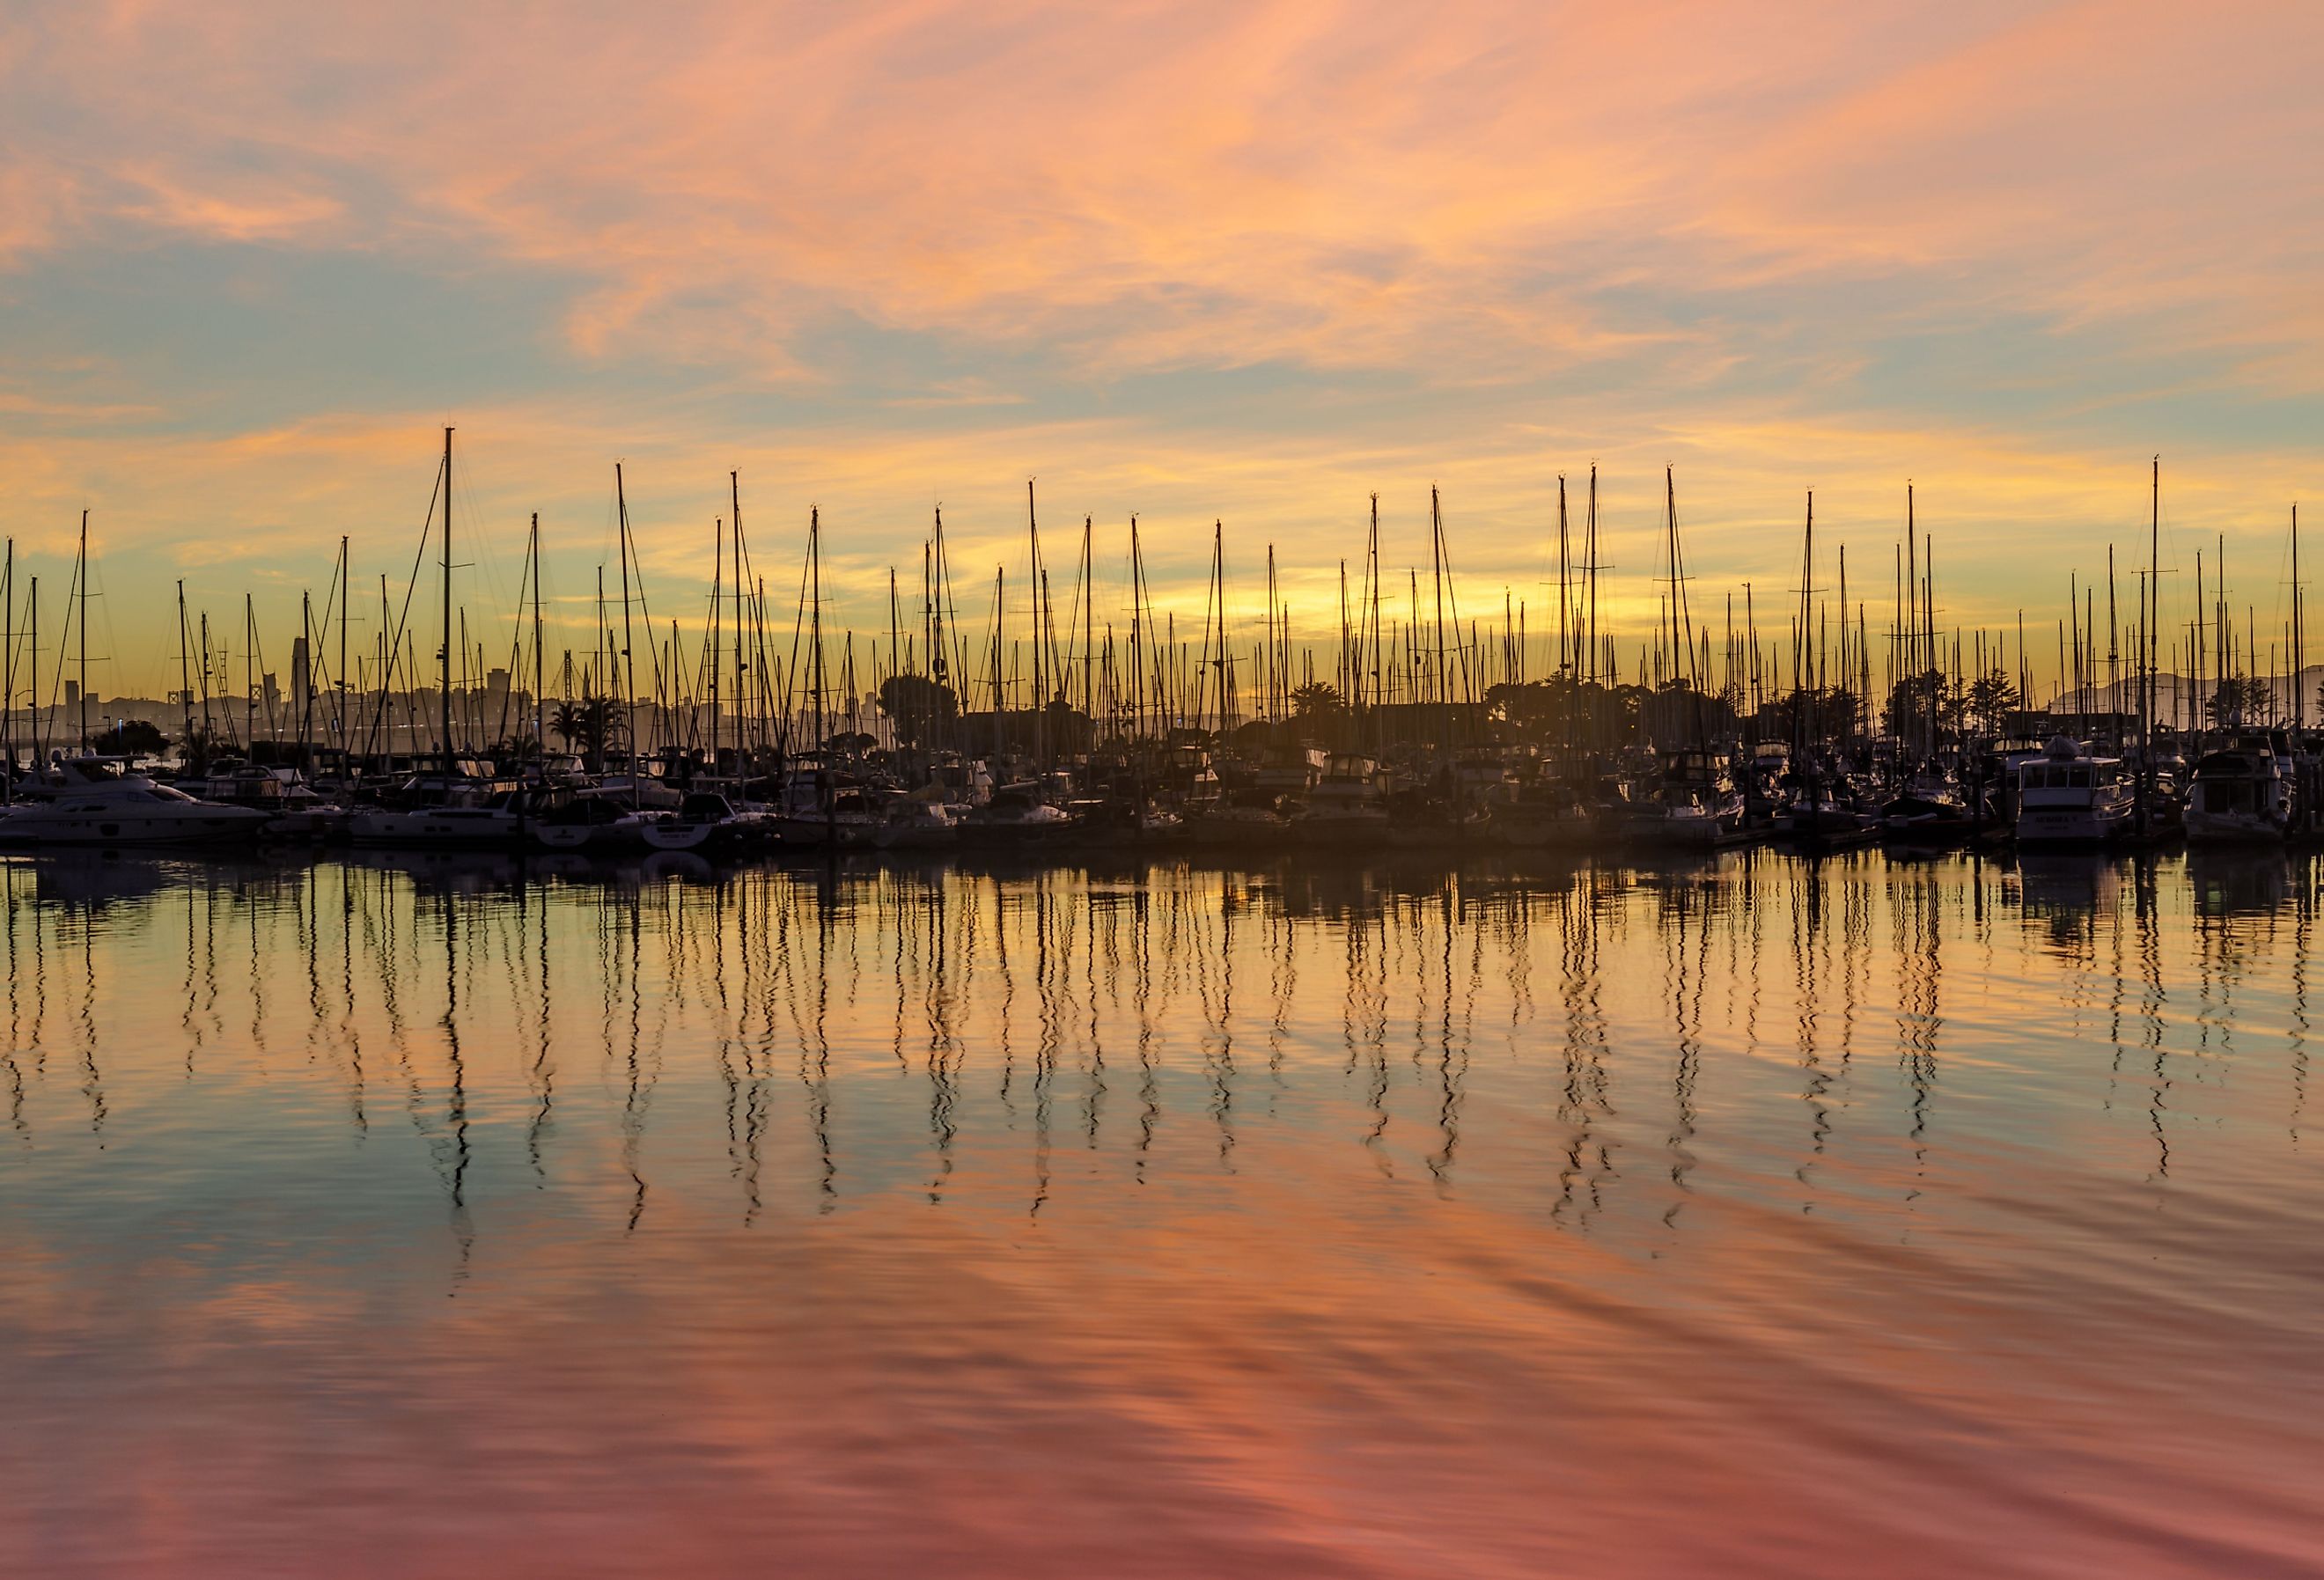 Sailboats moored in San Francisco Bay with sunset skies and water reflections in Alameda County. Image credit yhelfman via Shutterstock. 